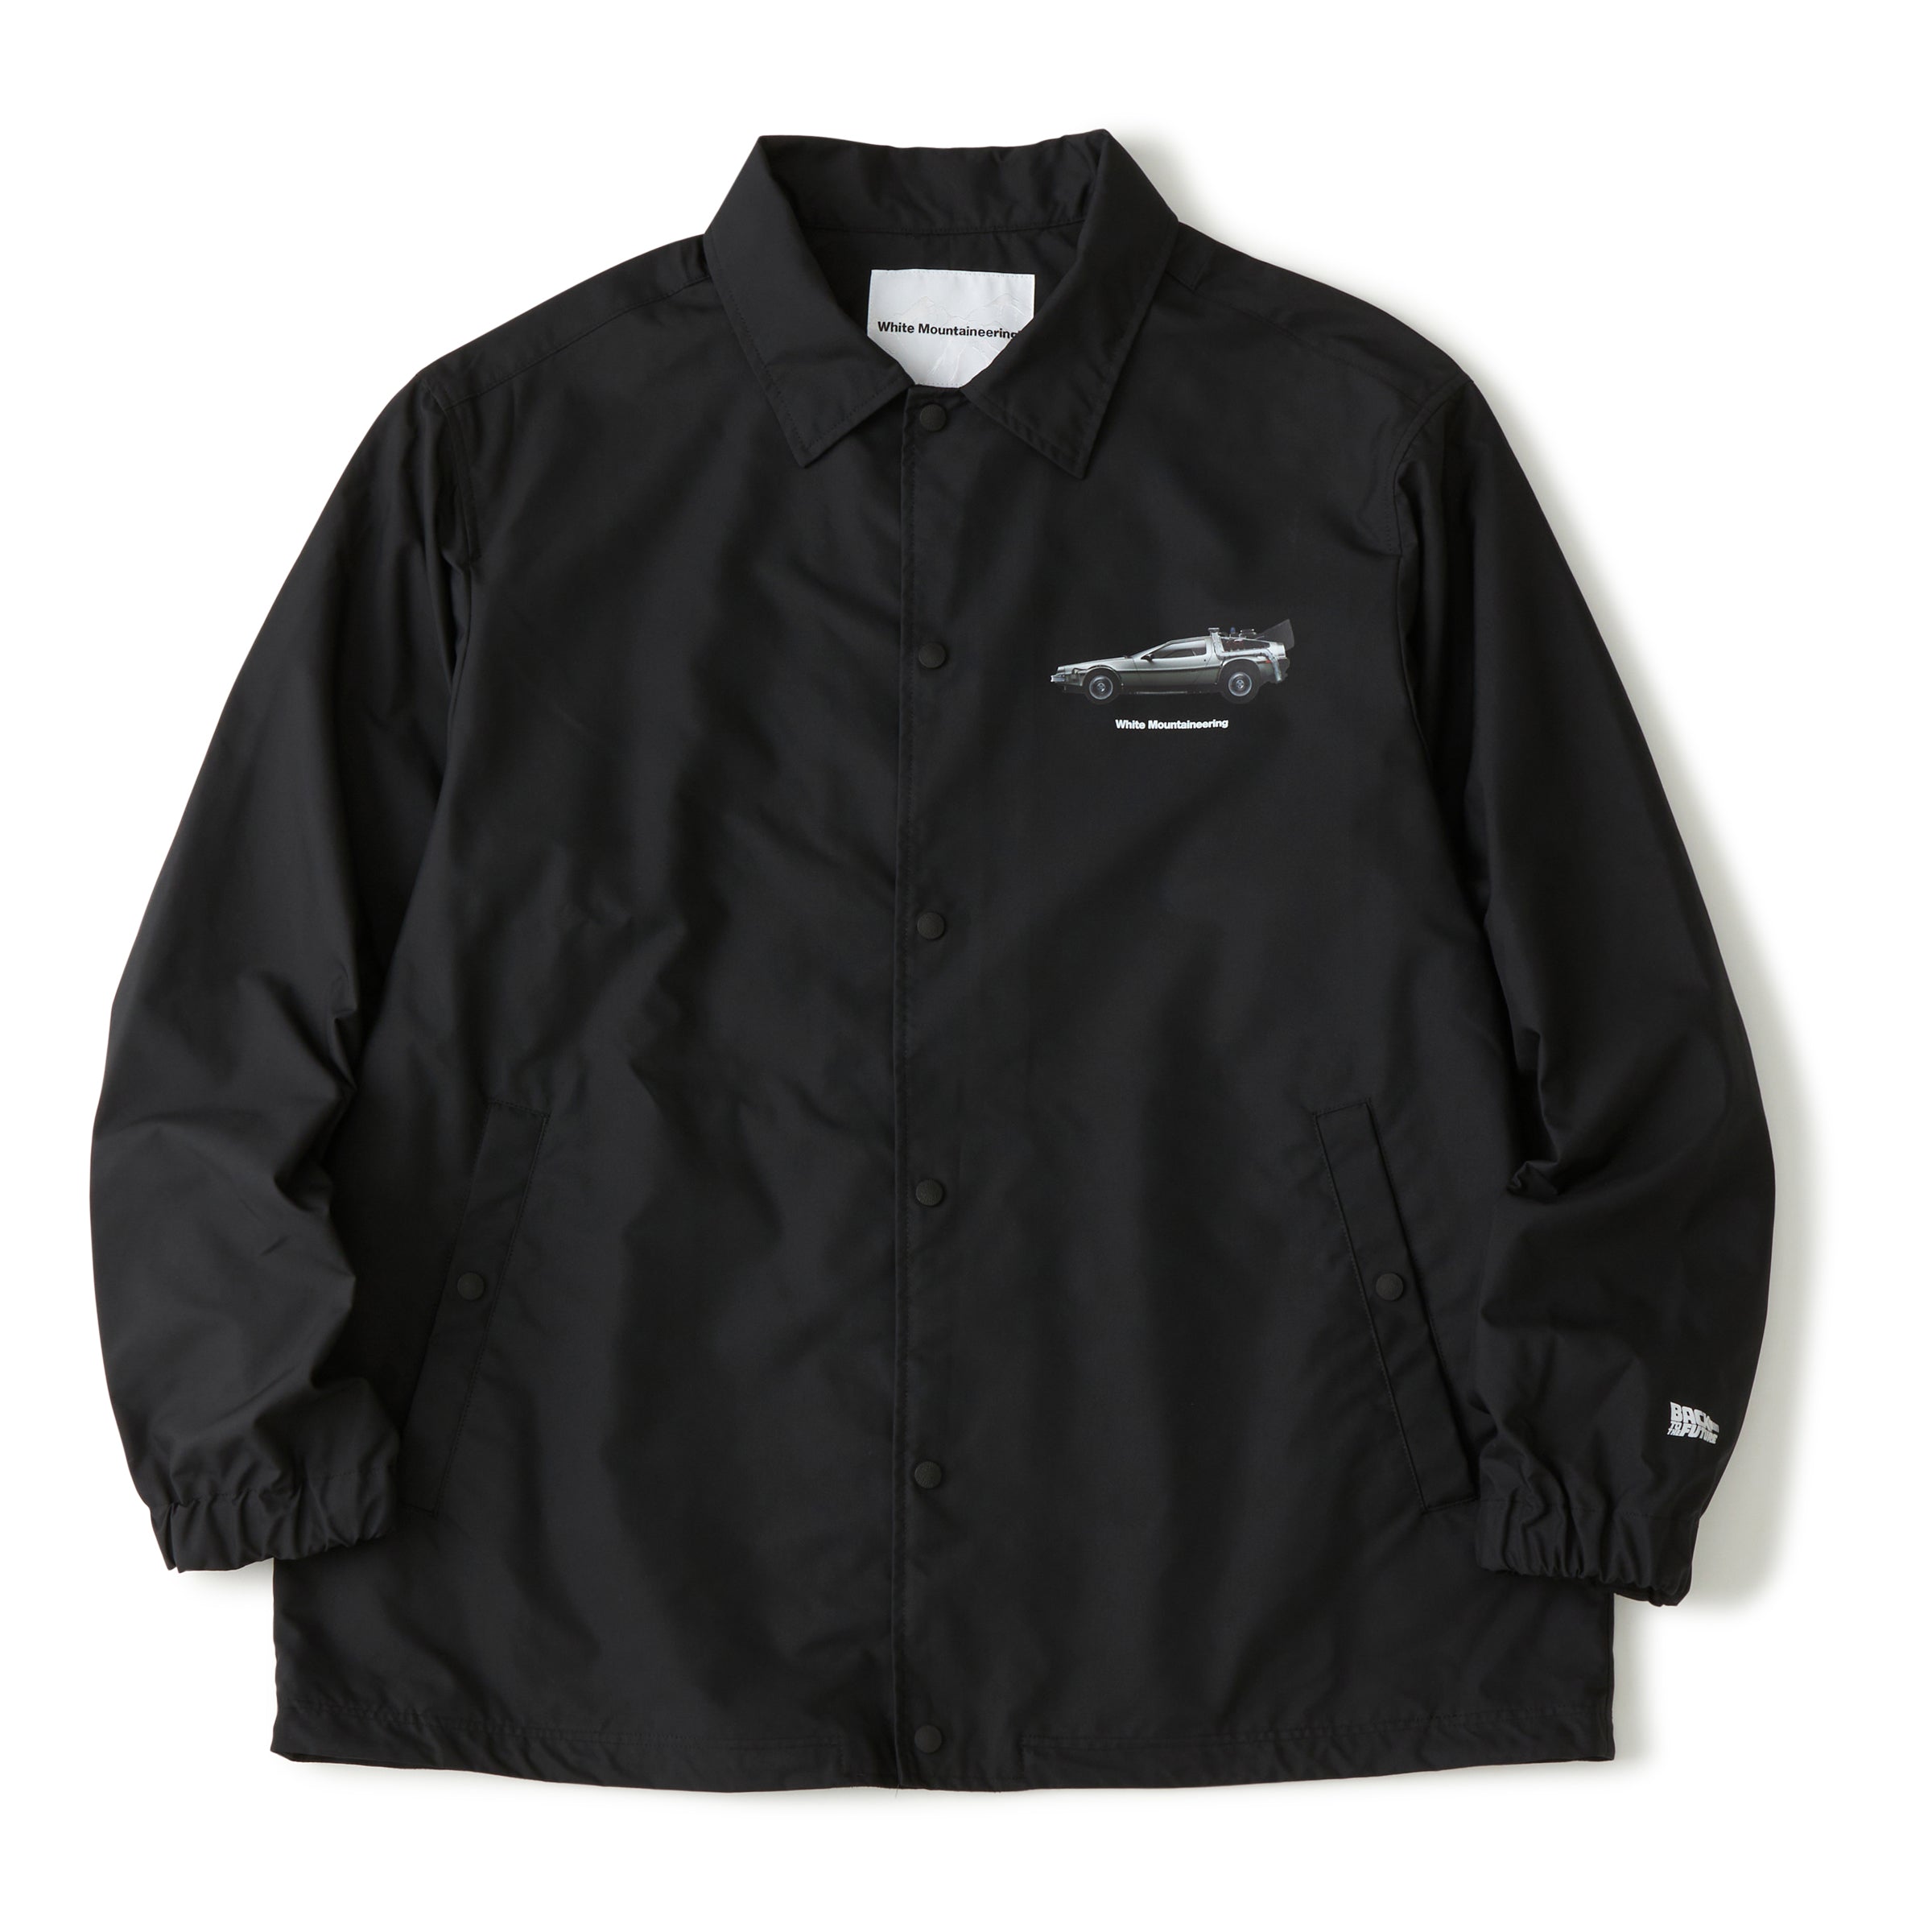 DELOREAN COACH JACKET – White Mountaineering OFFICIAL WEB SITE.